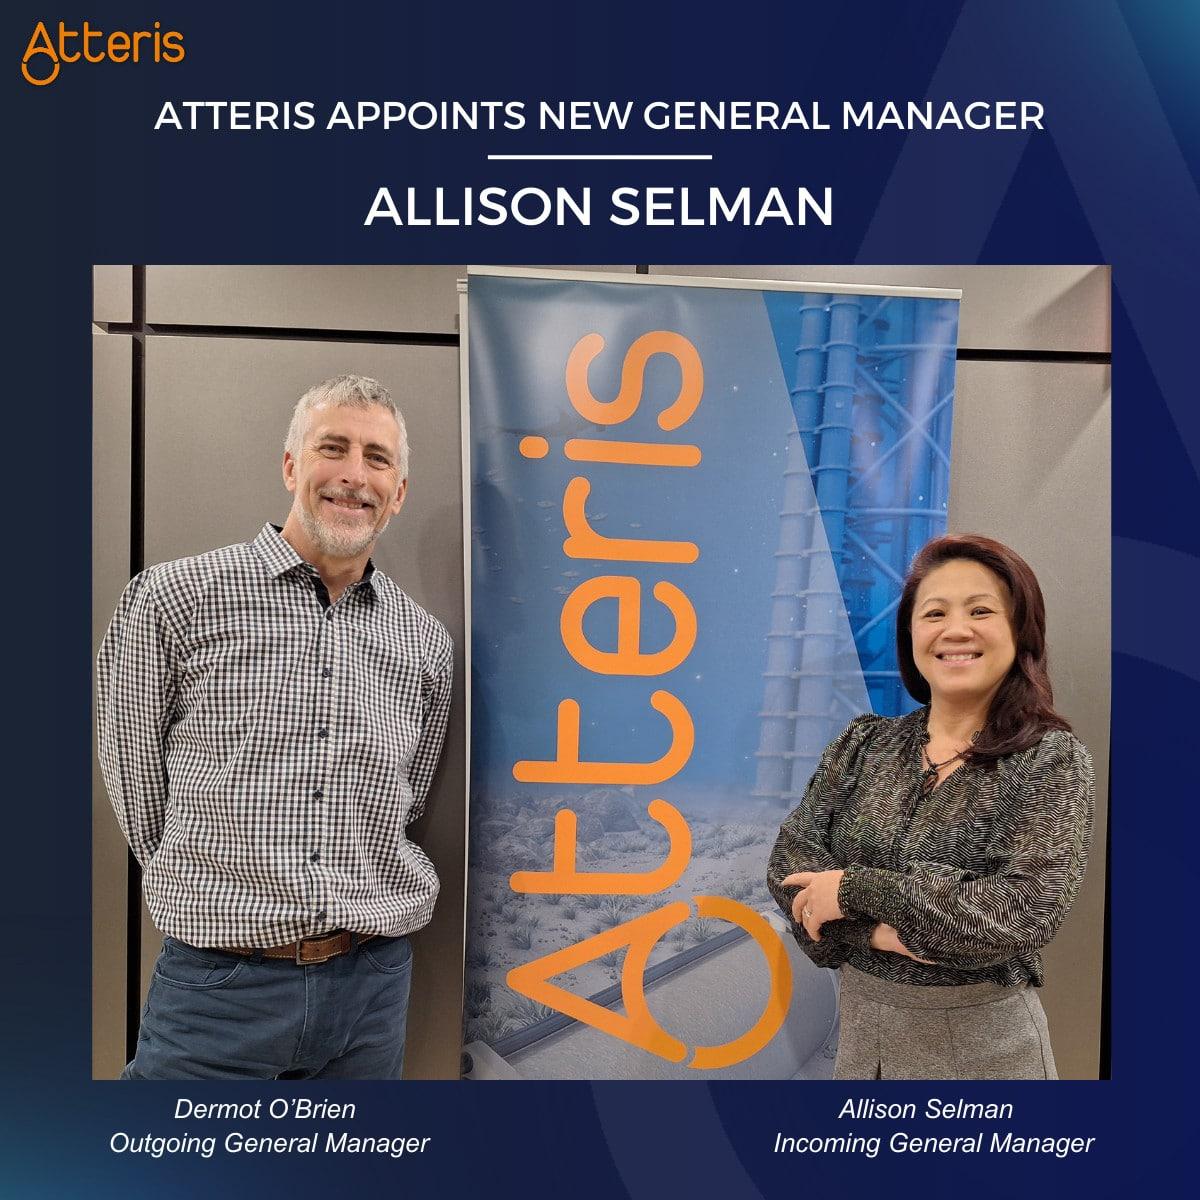 Atteris appoints new General Manager – Allison Selman